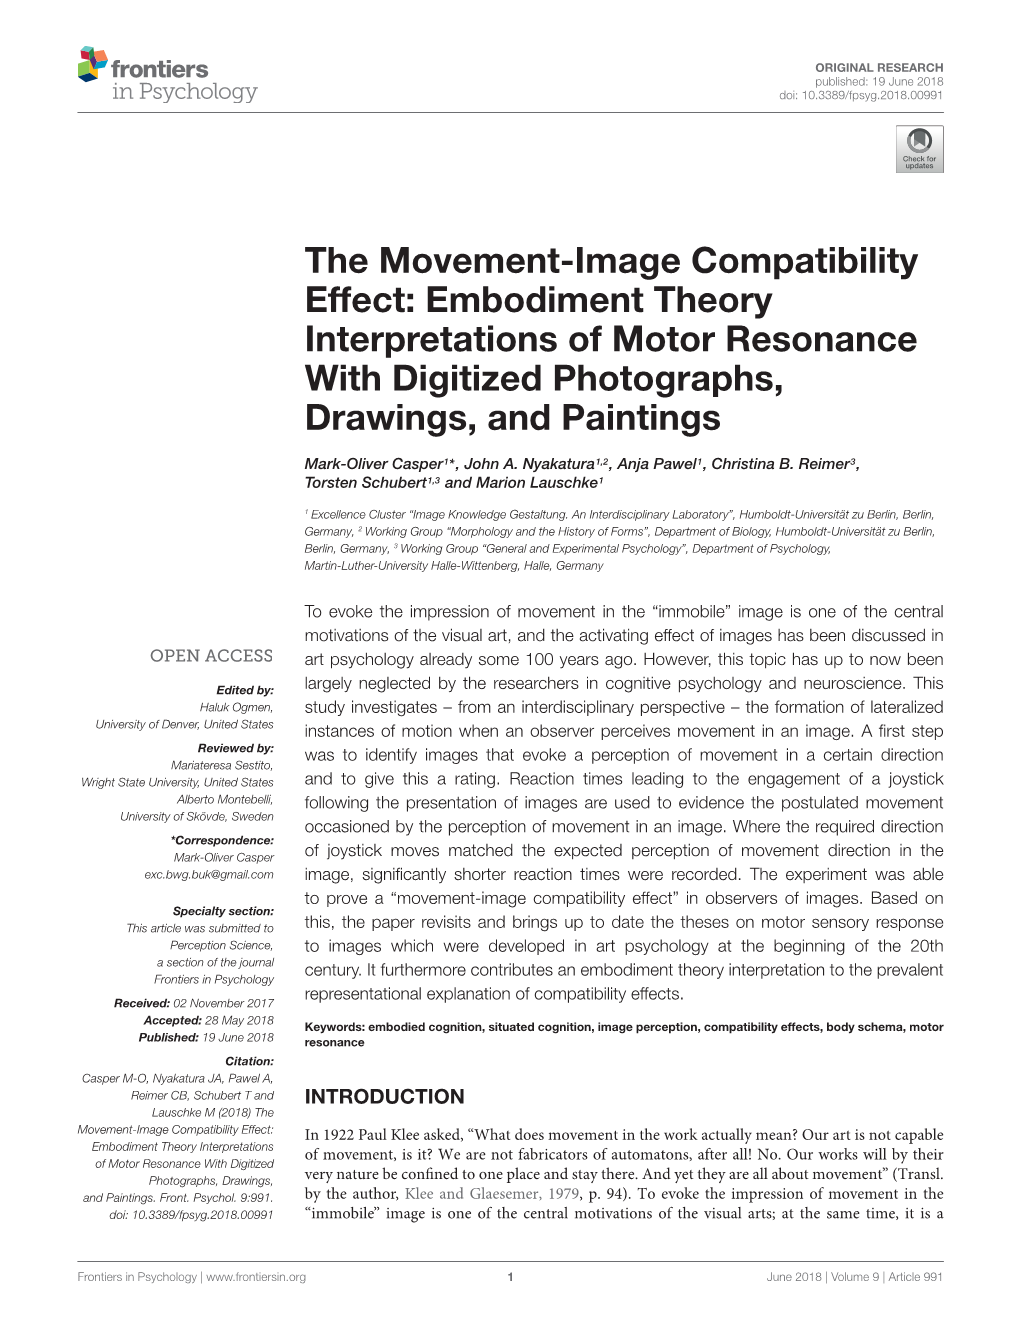 The Movement-Image Compatibility Effect: Embodiment Theory Interpretations of Motor Resonance with Digitized Photographs, Drawings, and Paintings